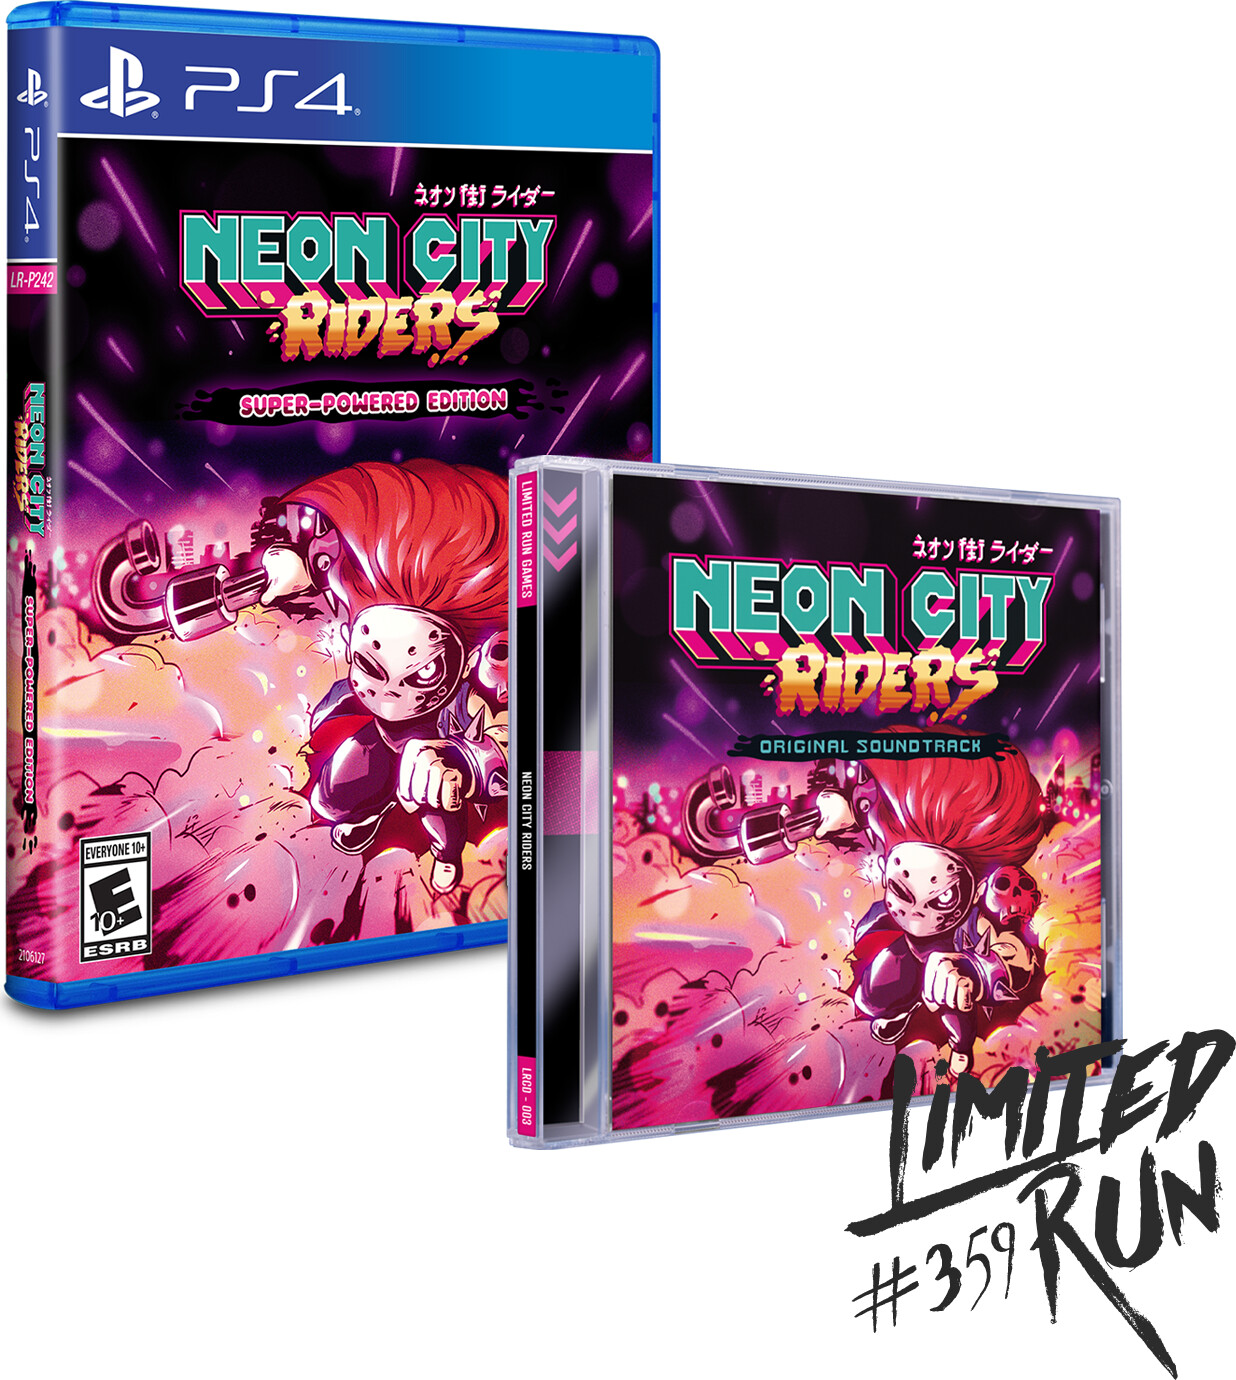 Billede af Neon City Riders - Super-powered Edition (limited Run #359) (import) - PS4